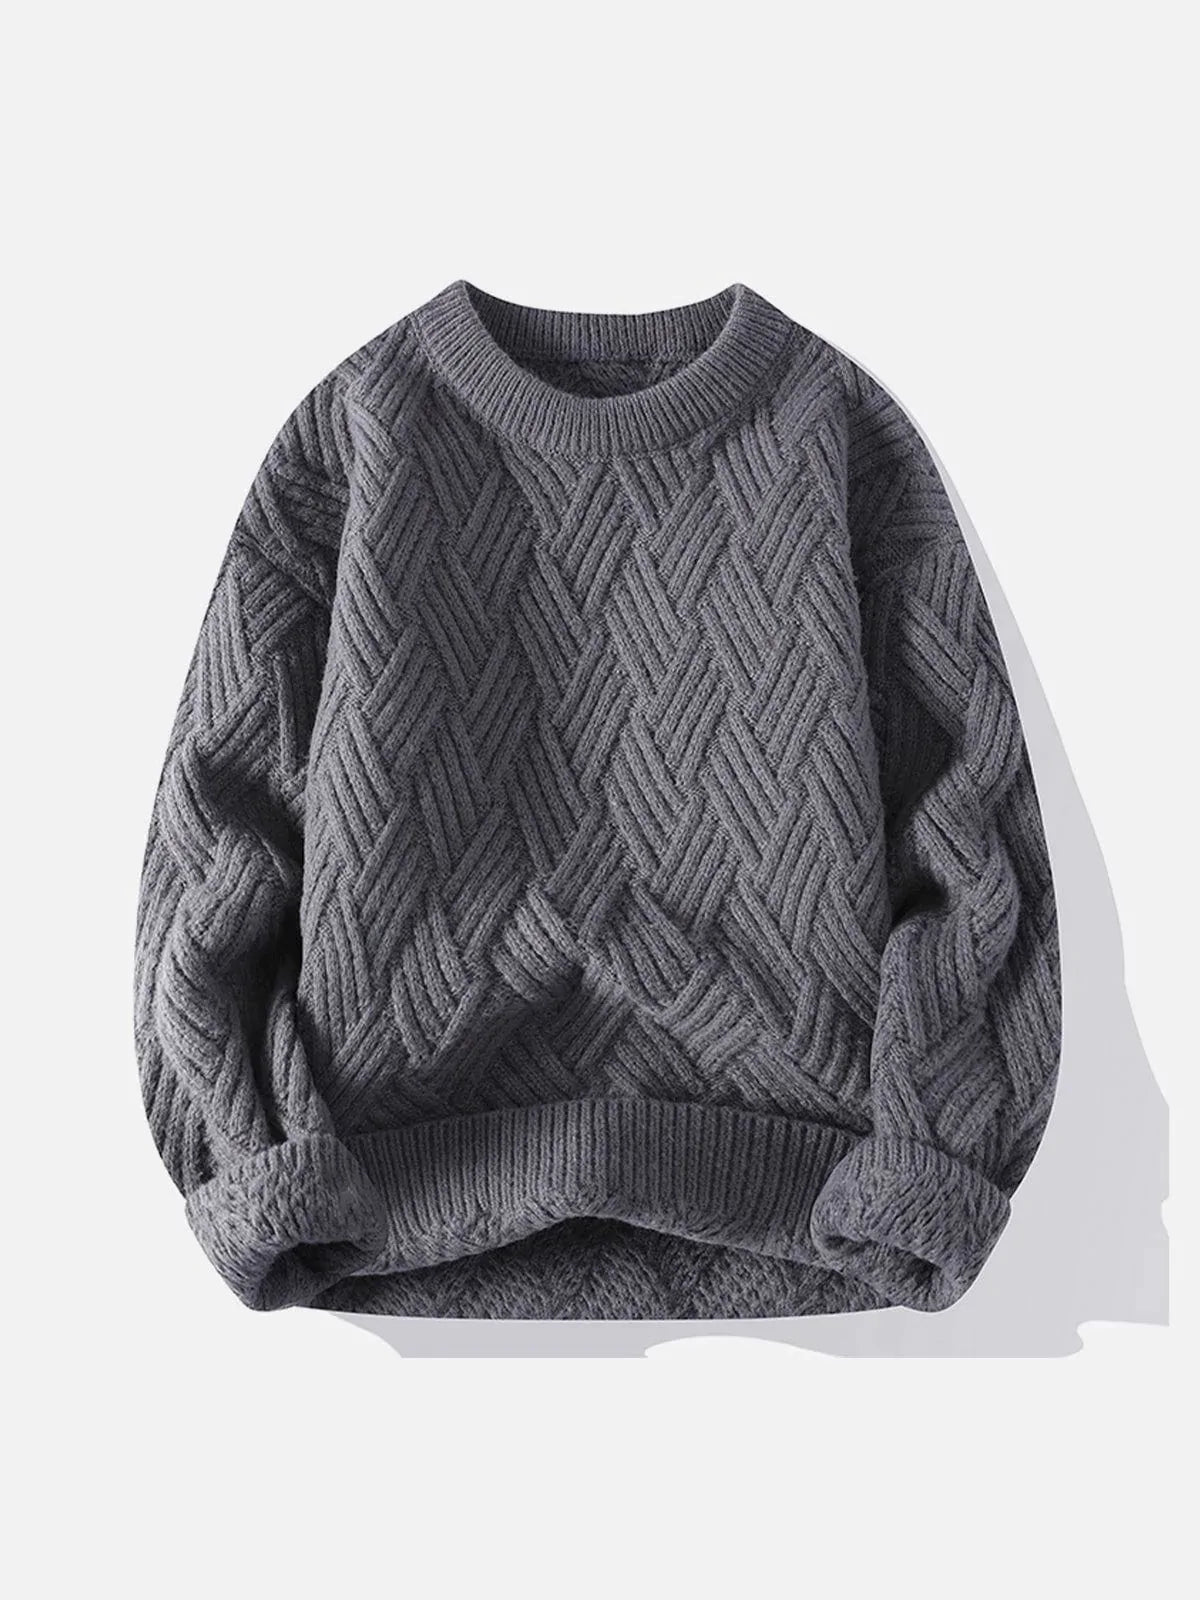 Majesda® - Solid Color Weave Cozy Sweater outfit ideas streetwear fashion